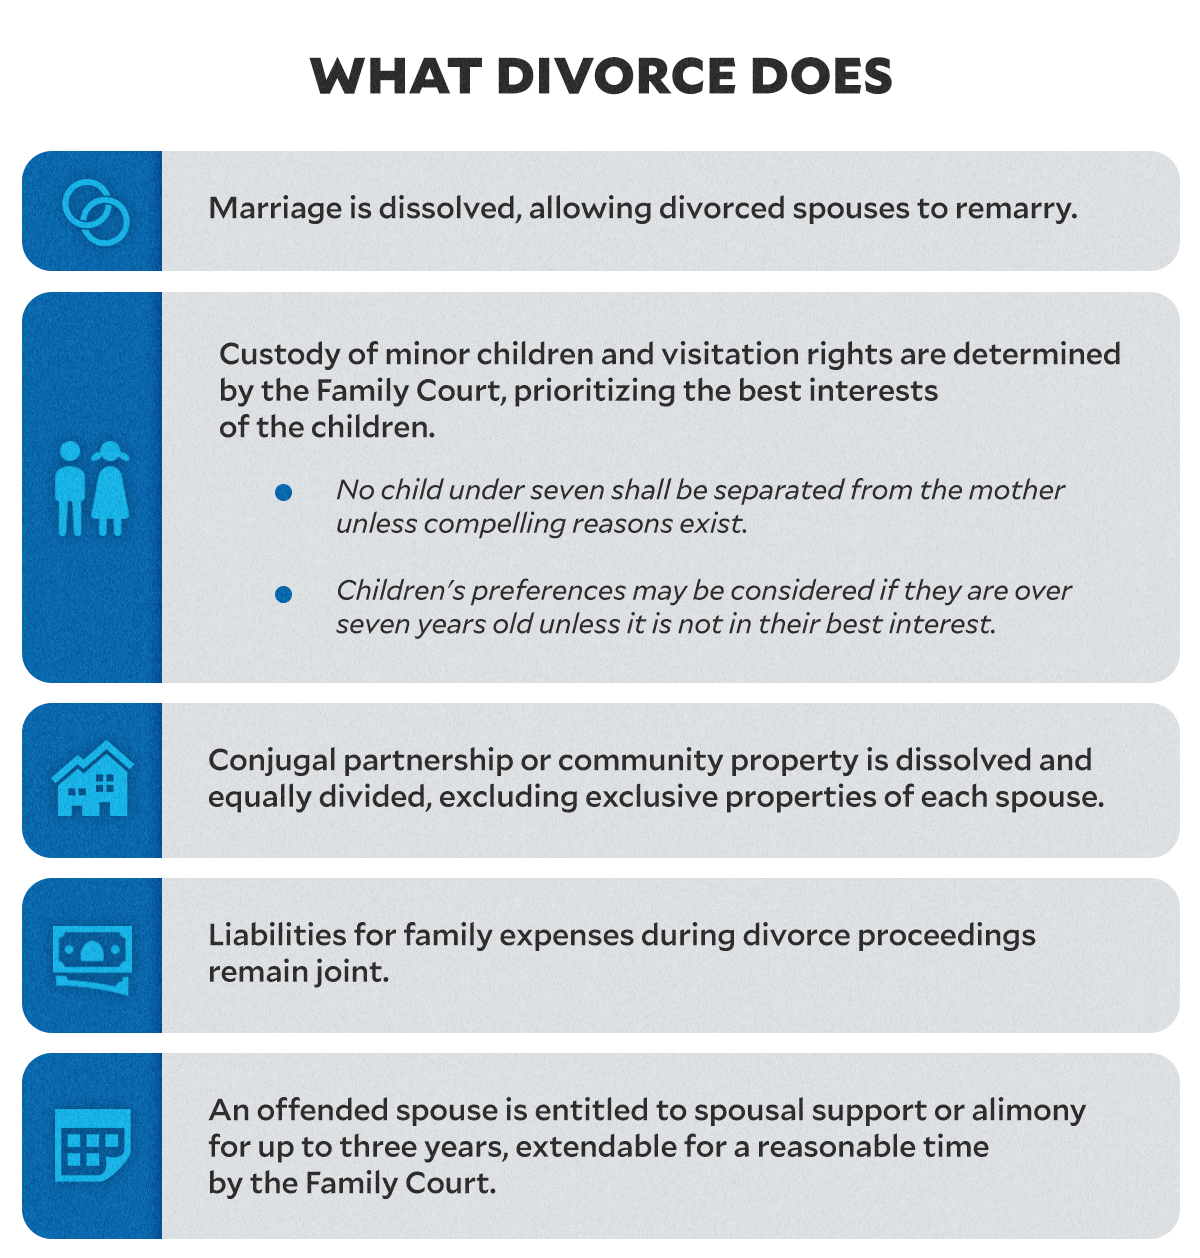 Divorce: ‘Not for everyone’